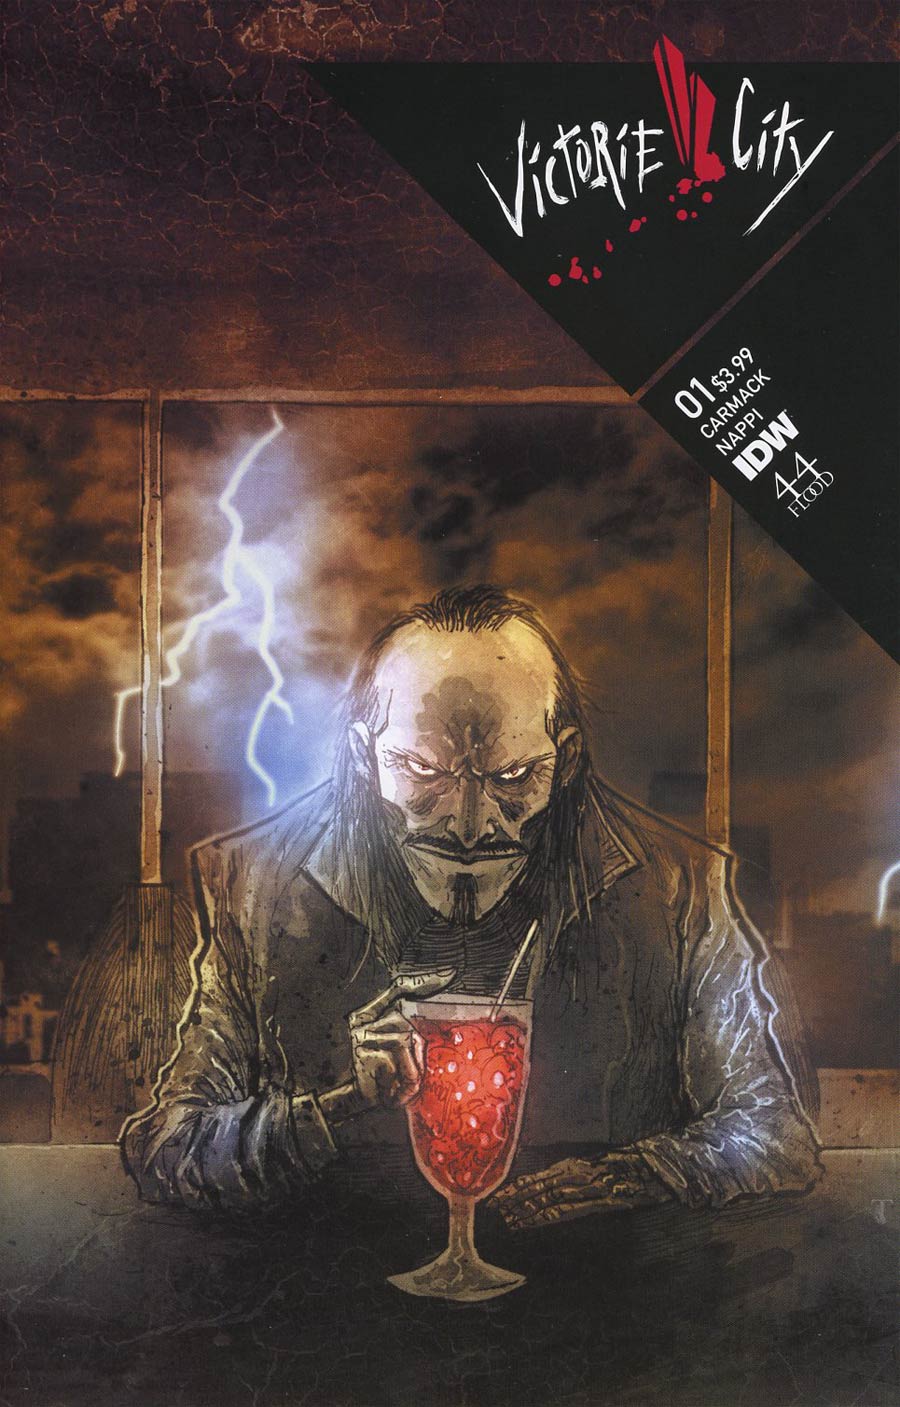 Victorie City #1 Cover A Regular Ben Templesmith Cover